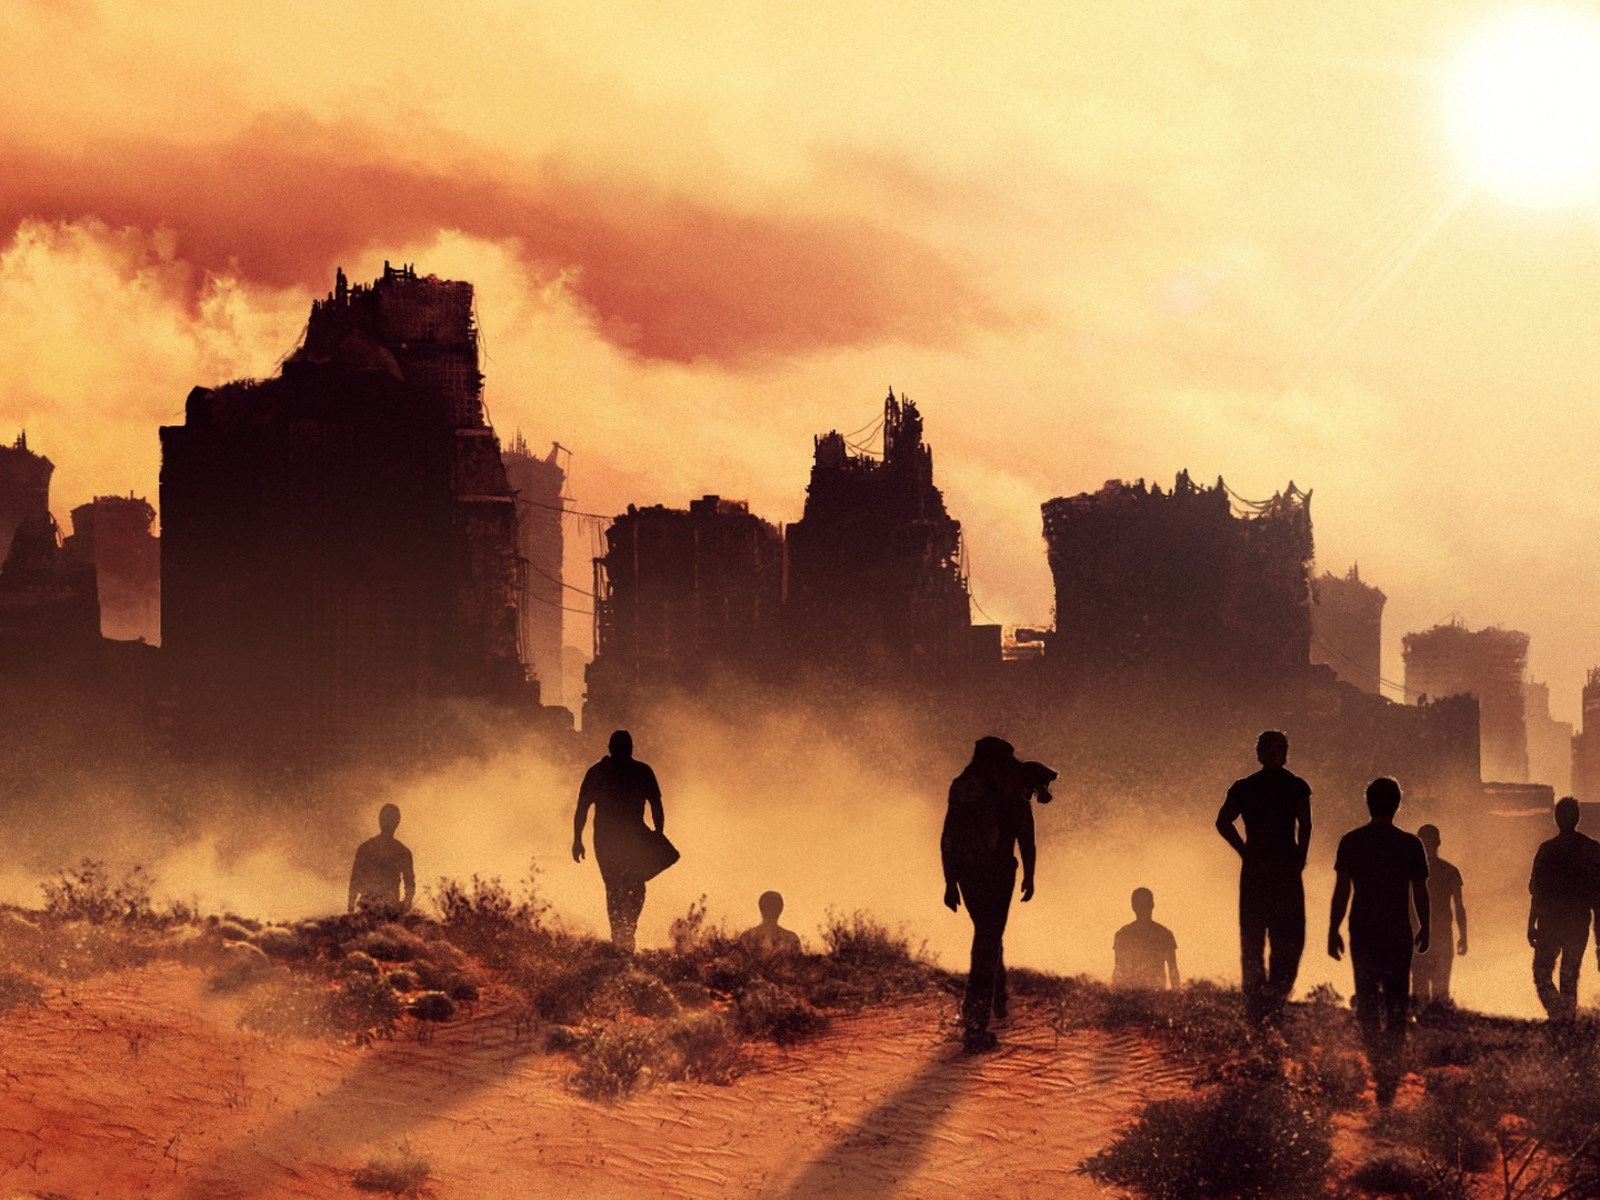 Maze Runner The Scorch Trials Silhouettes for 1600 x 1200 resolution